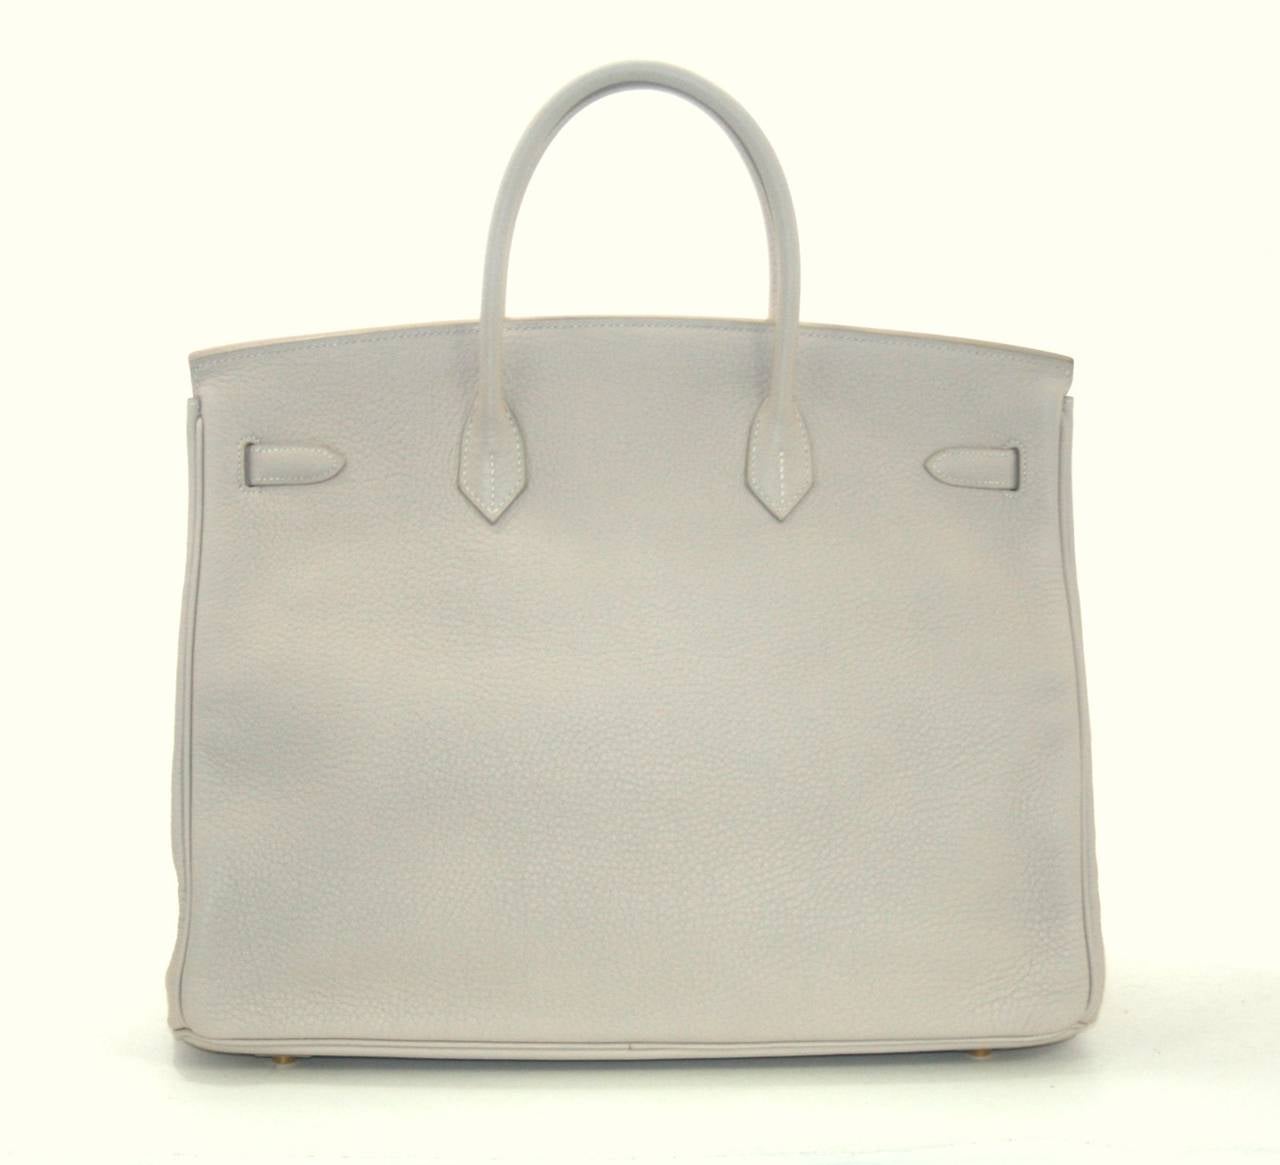 Nearly pristine Hermes Birkin in Poudre Togo Leather, 40 cm size. Protective plastic  intact on all the hardware except the feet and toggle; carried once.     Crafted by hand and considered by many as the epitome of luxury items, Birkins are